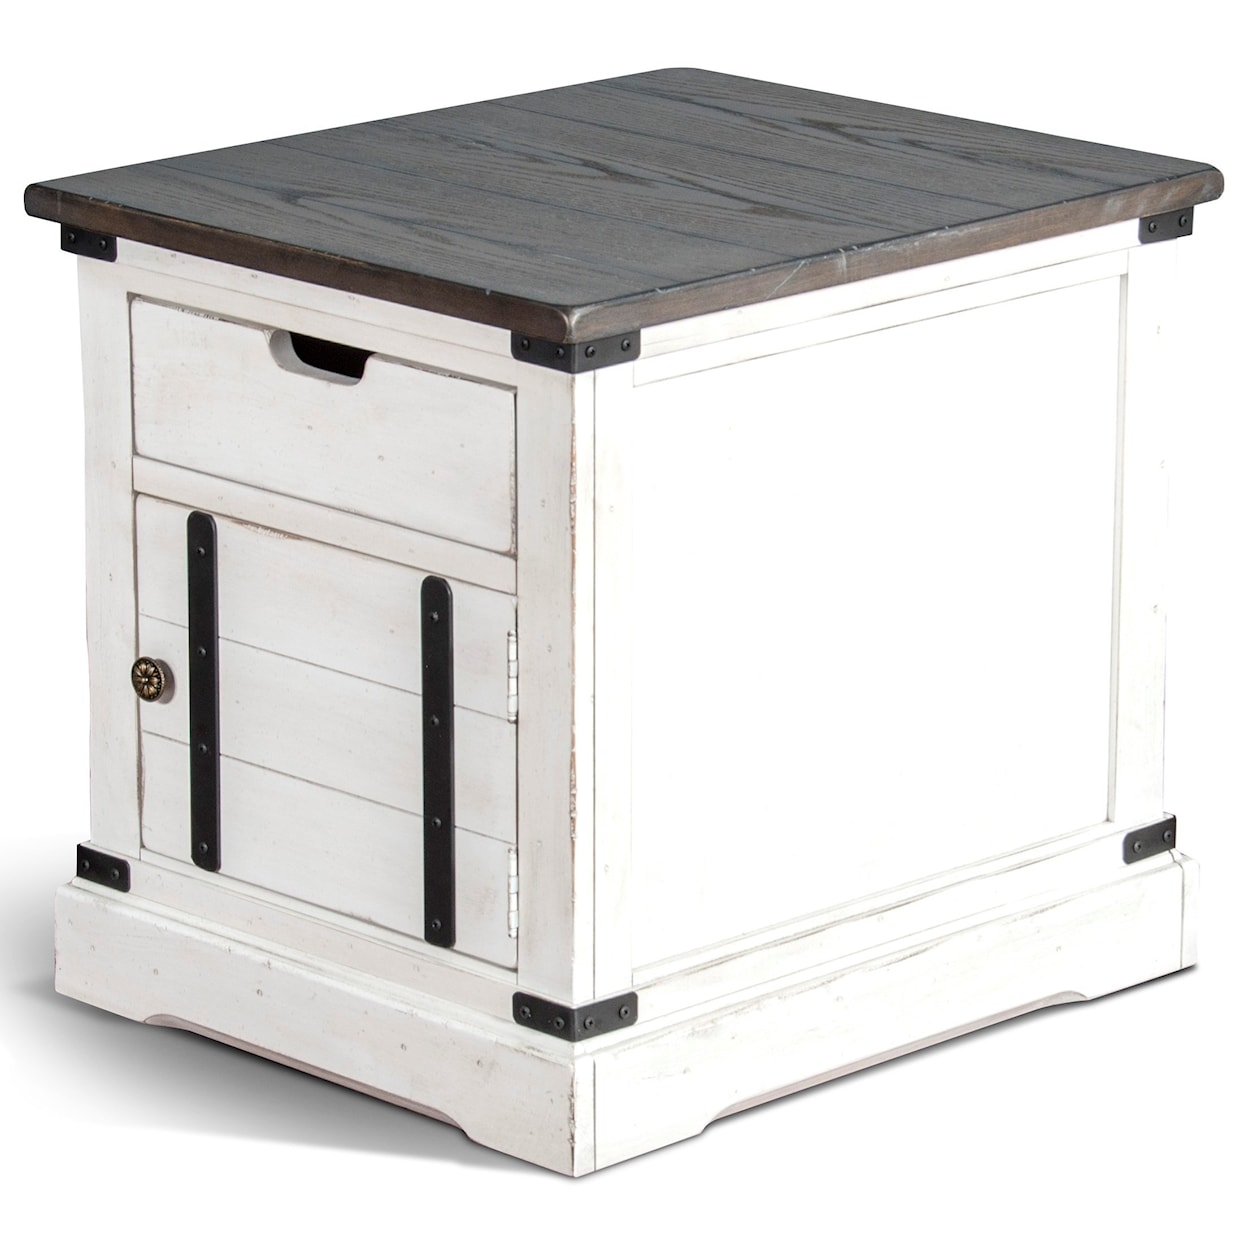 Sunny Designs 3270 End Table